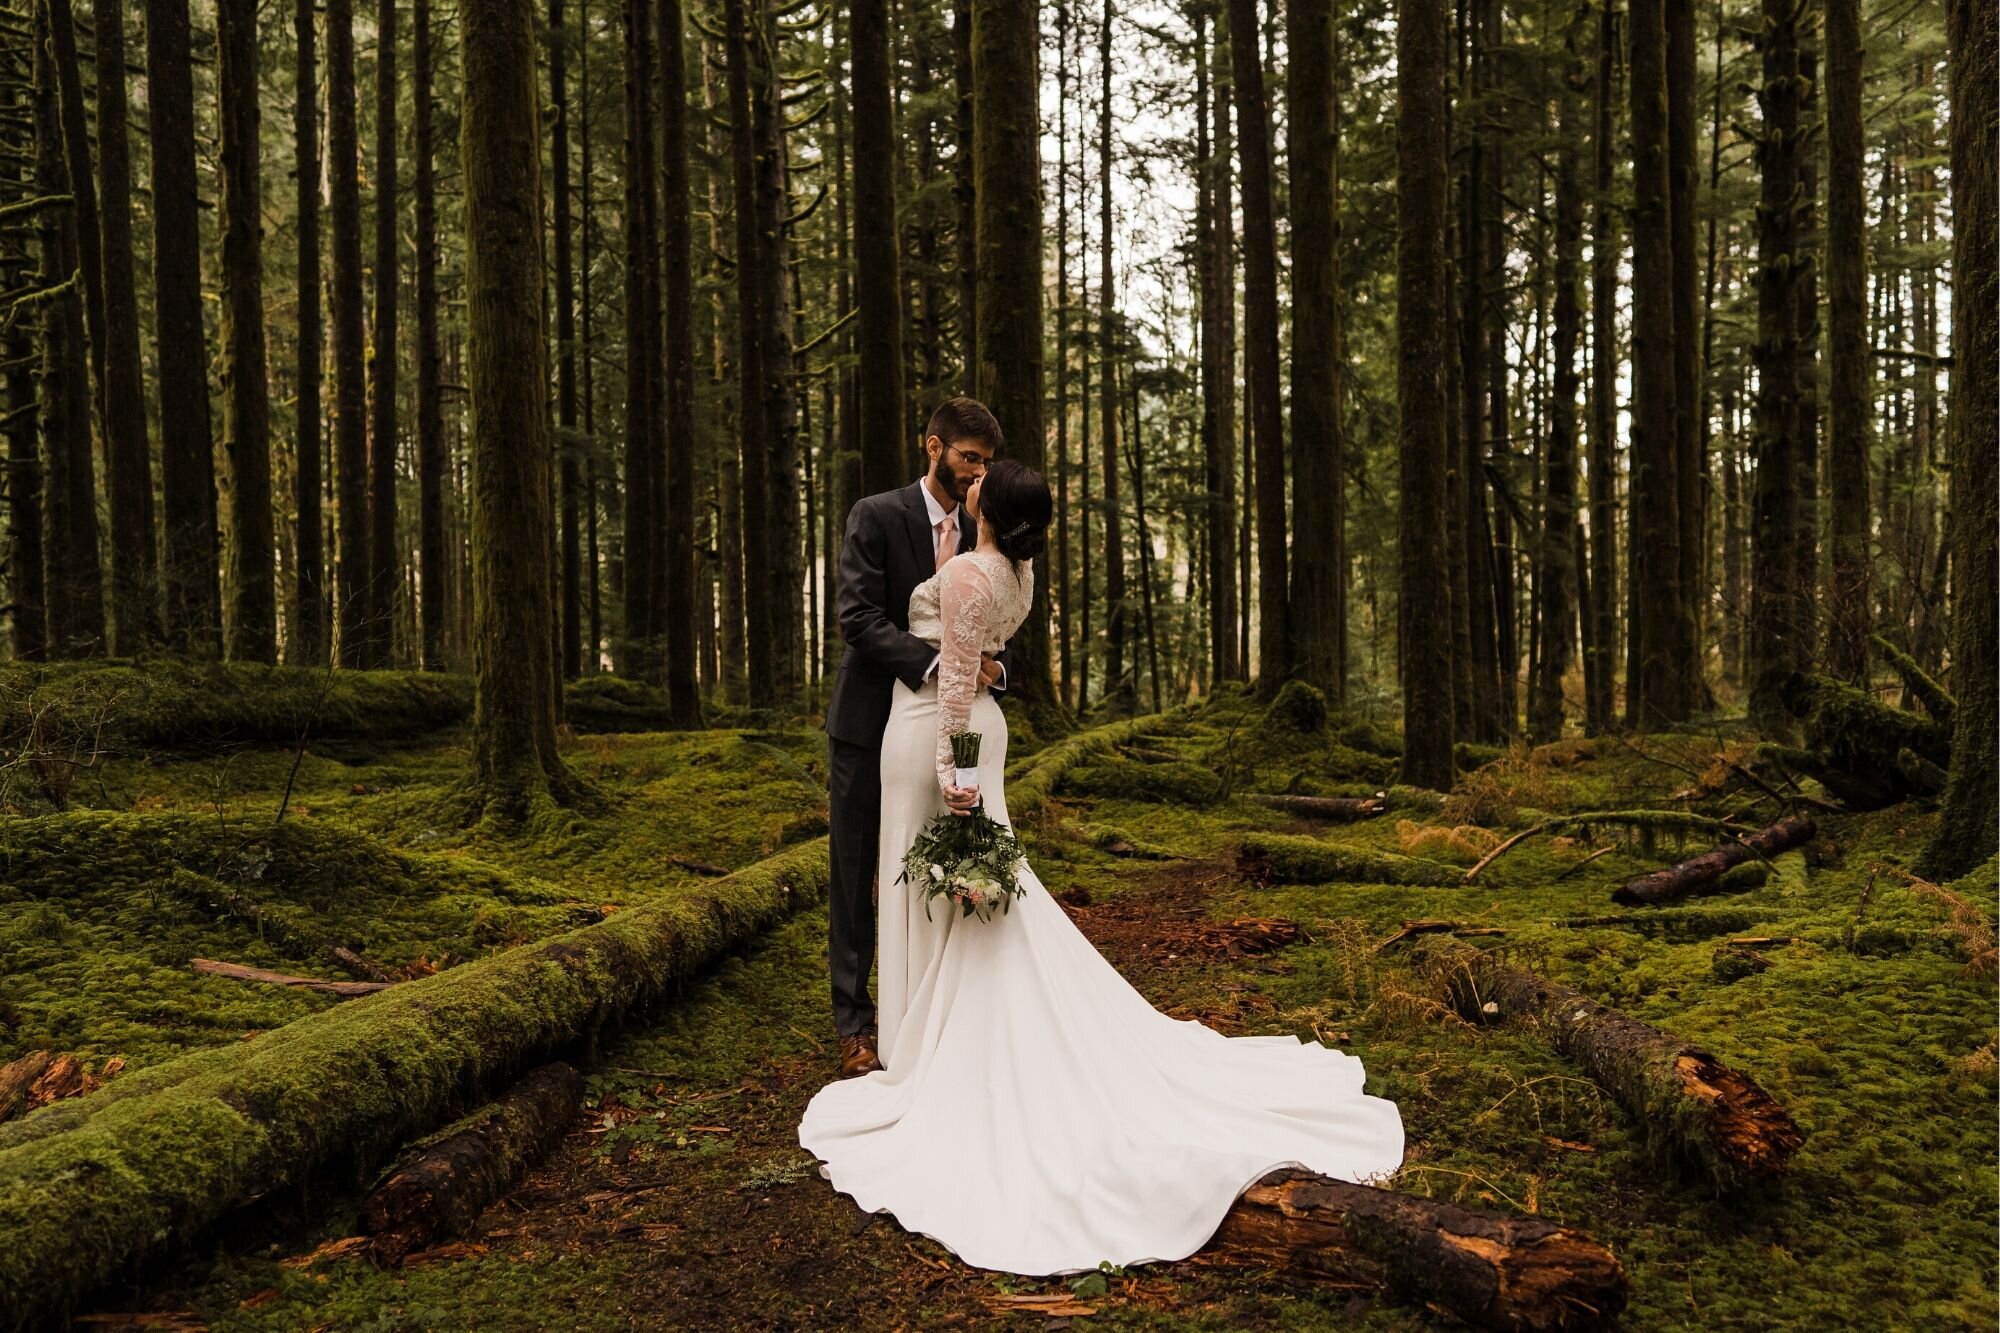 Top Three Places for Your Seattle Elopement | Between the Pine Adventure Wedding and Elopement Photography